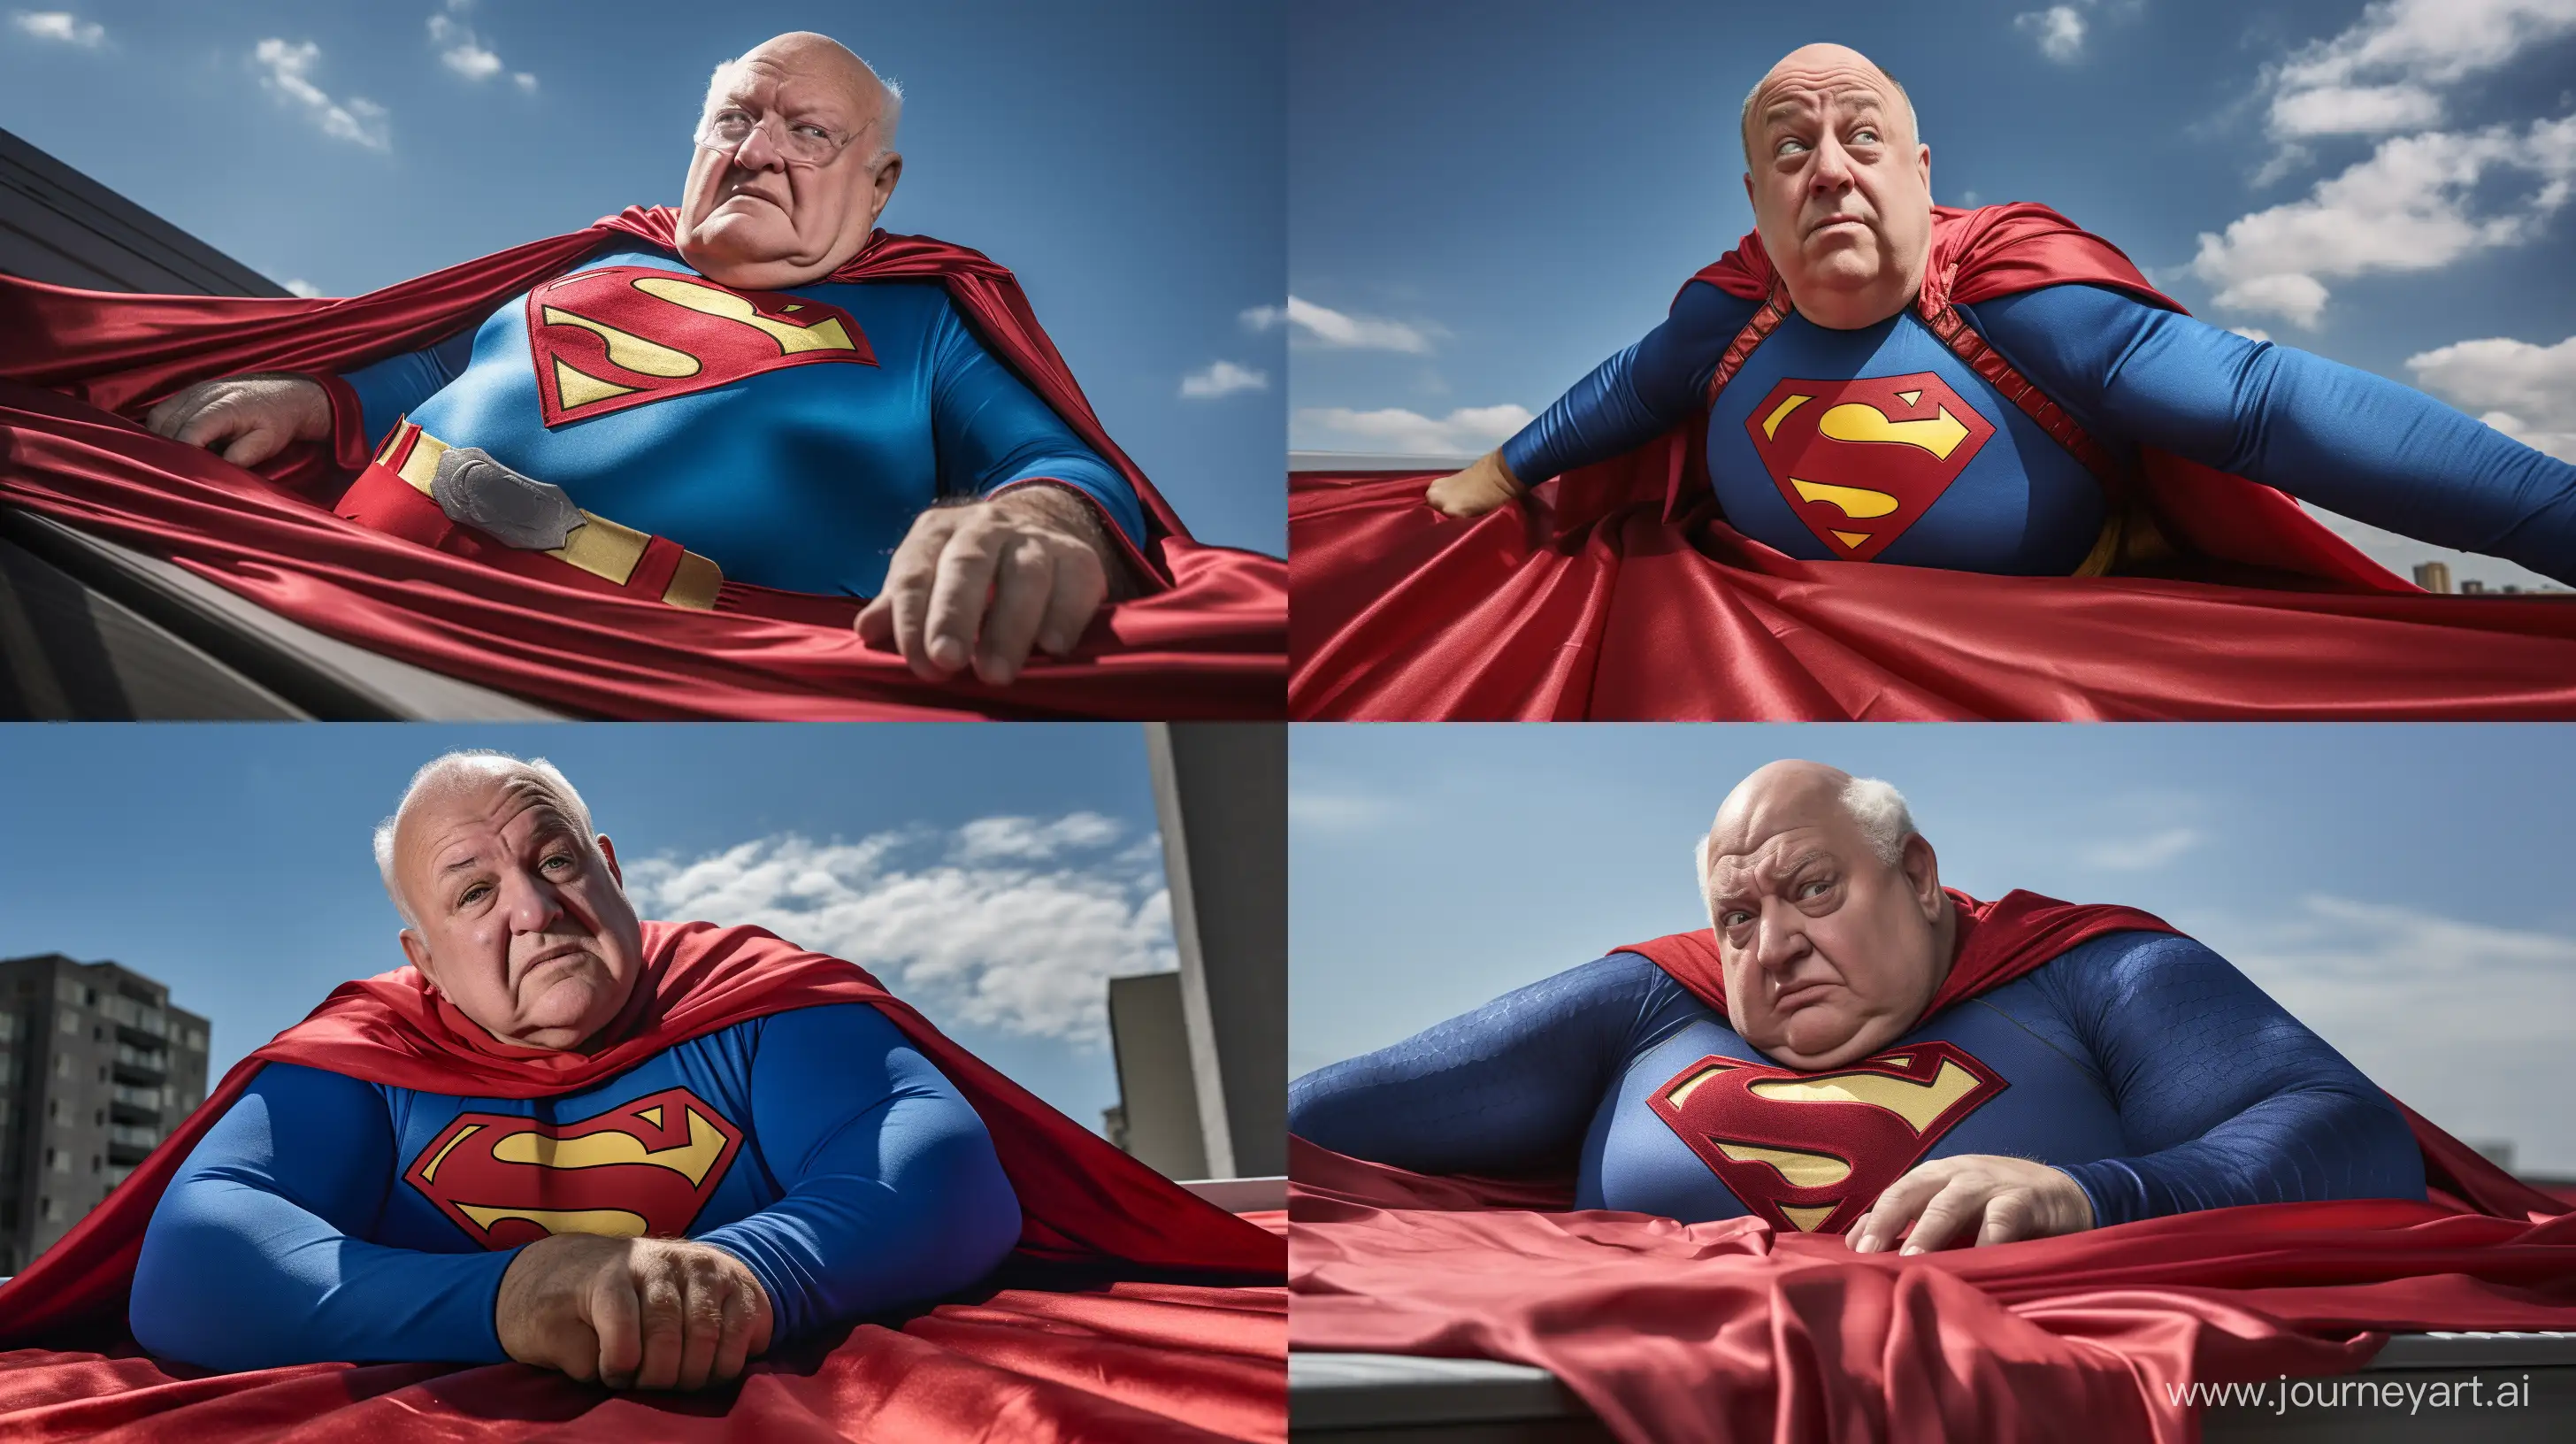 front view chubby 70 years old man lying on his back, blue tight spandex superman costume, red cape, rooftop, daylight, clean shaven, bald, sharp-focus, high-quality, award-winning photograph, Canon EOS 5D Mark IV DSLR, professional lighting setup, Adobe Photoshop --ar 16:9